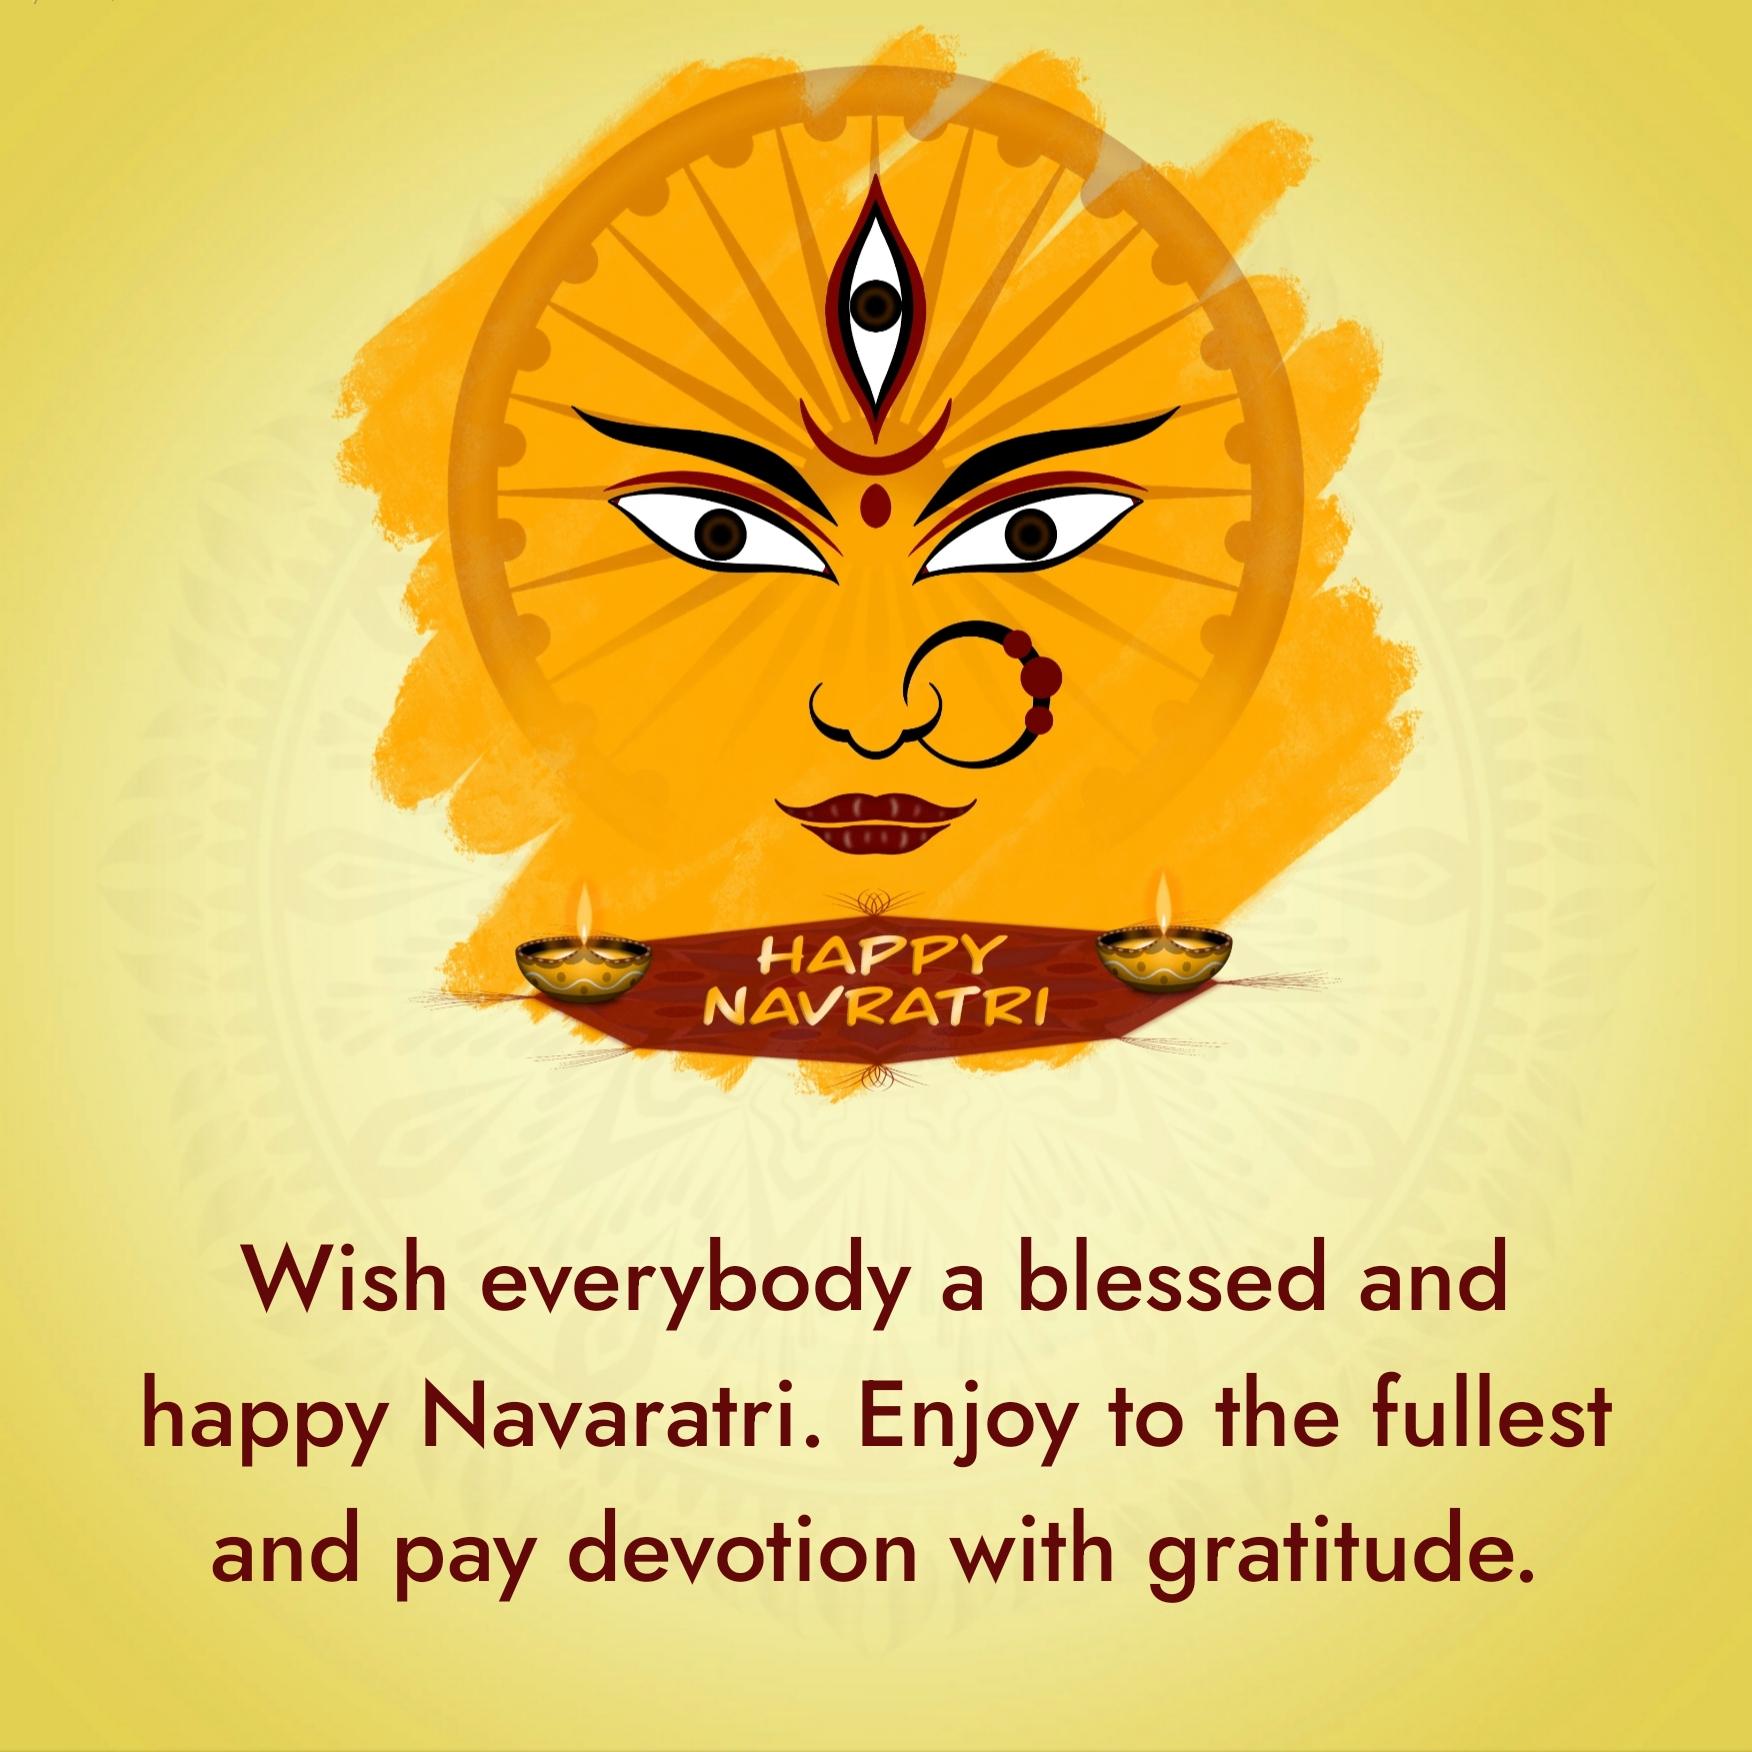 Wish everybody a blessed and happy Navaratri